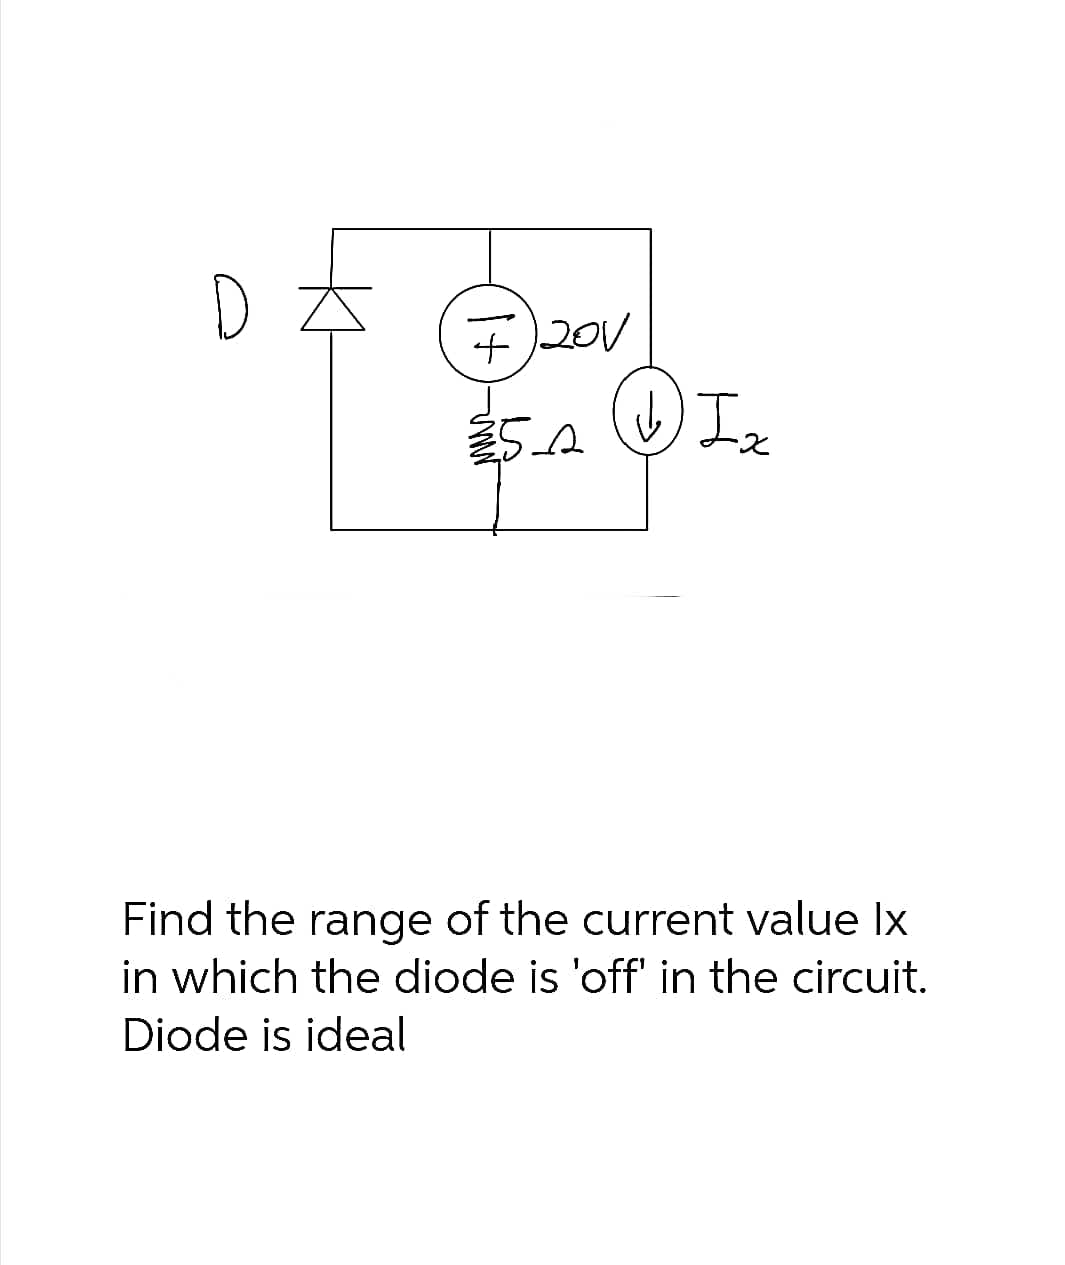 D
+ 201
25A
(b) Iz
Find the range of the current value Ix
in which the diode is 'off' in the circuit.
Diode is ideal